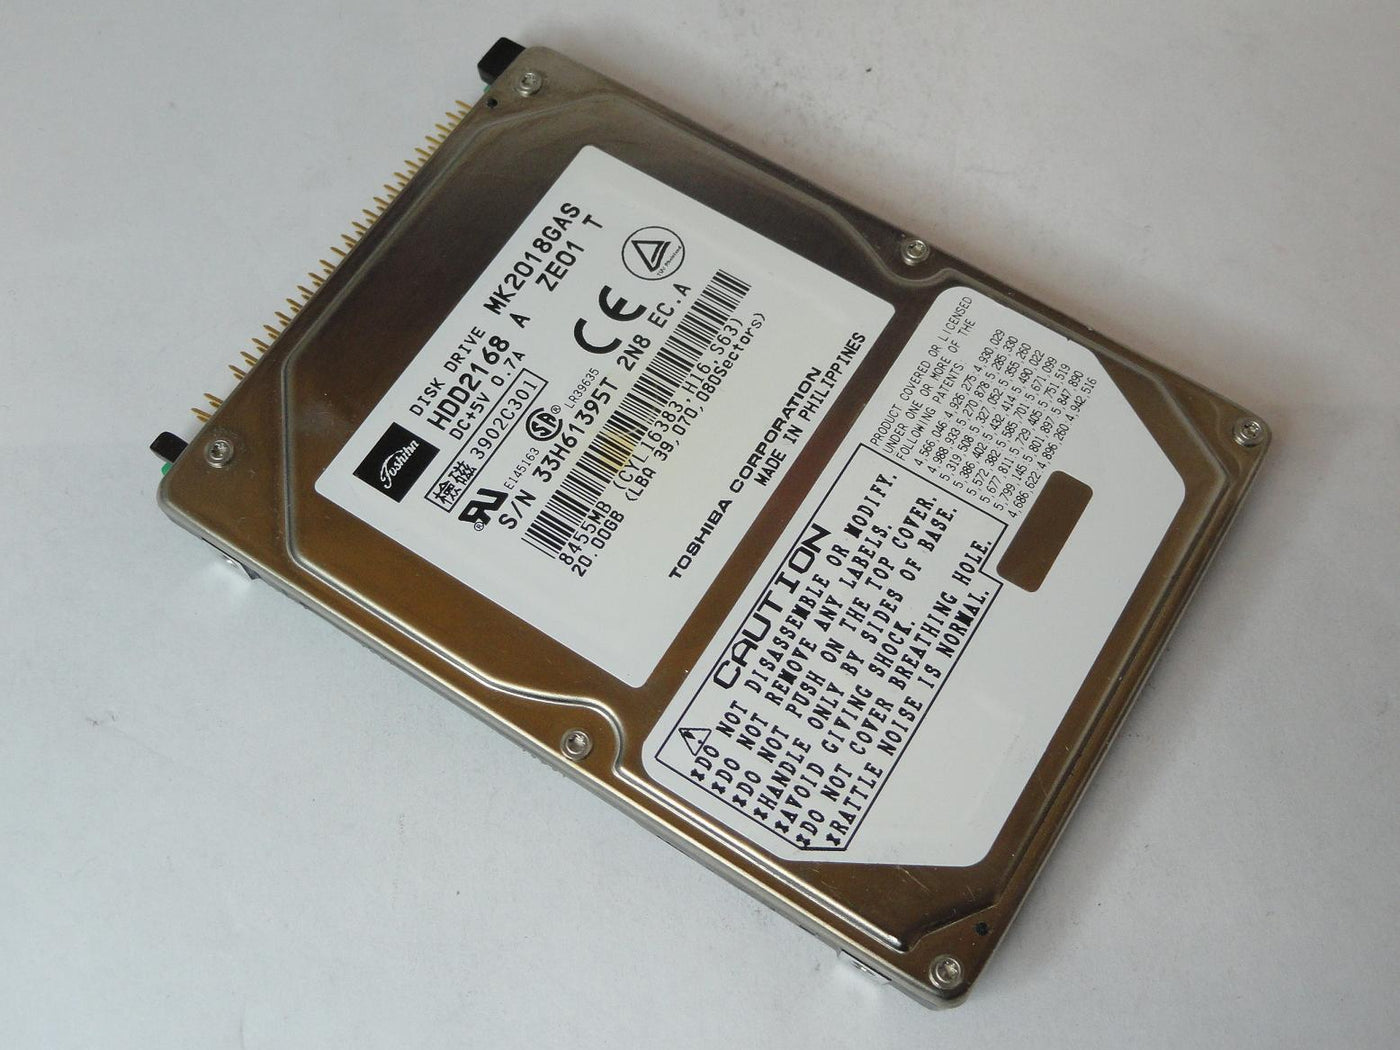 HDD2168 - Toshiba 20GB IDE 4200rpm 2.5in Laptop HDD - USED